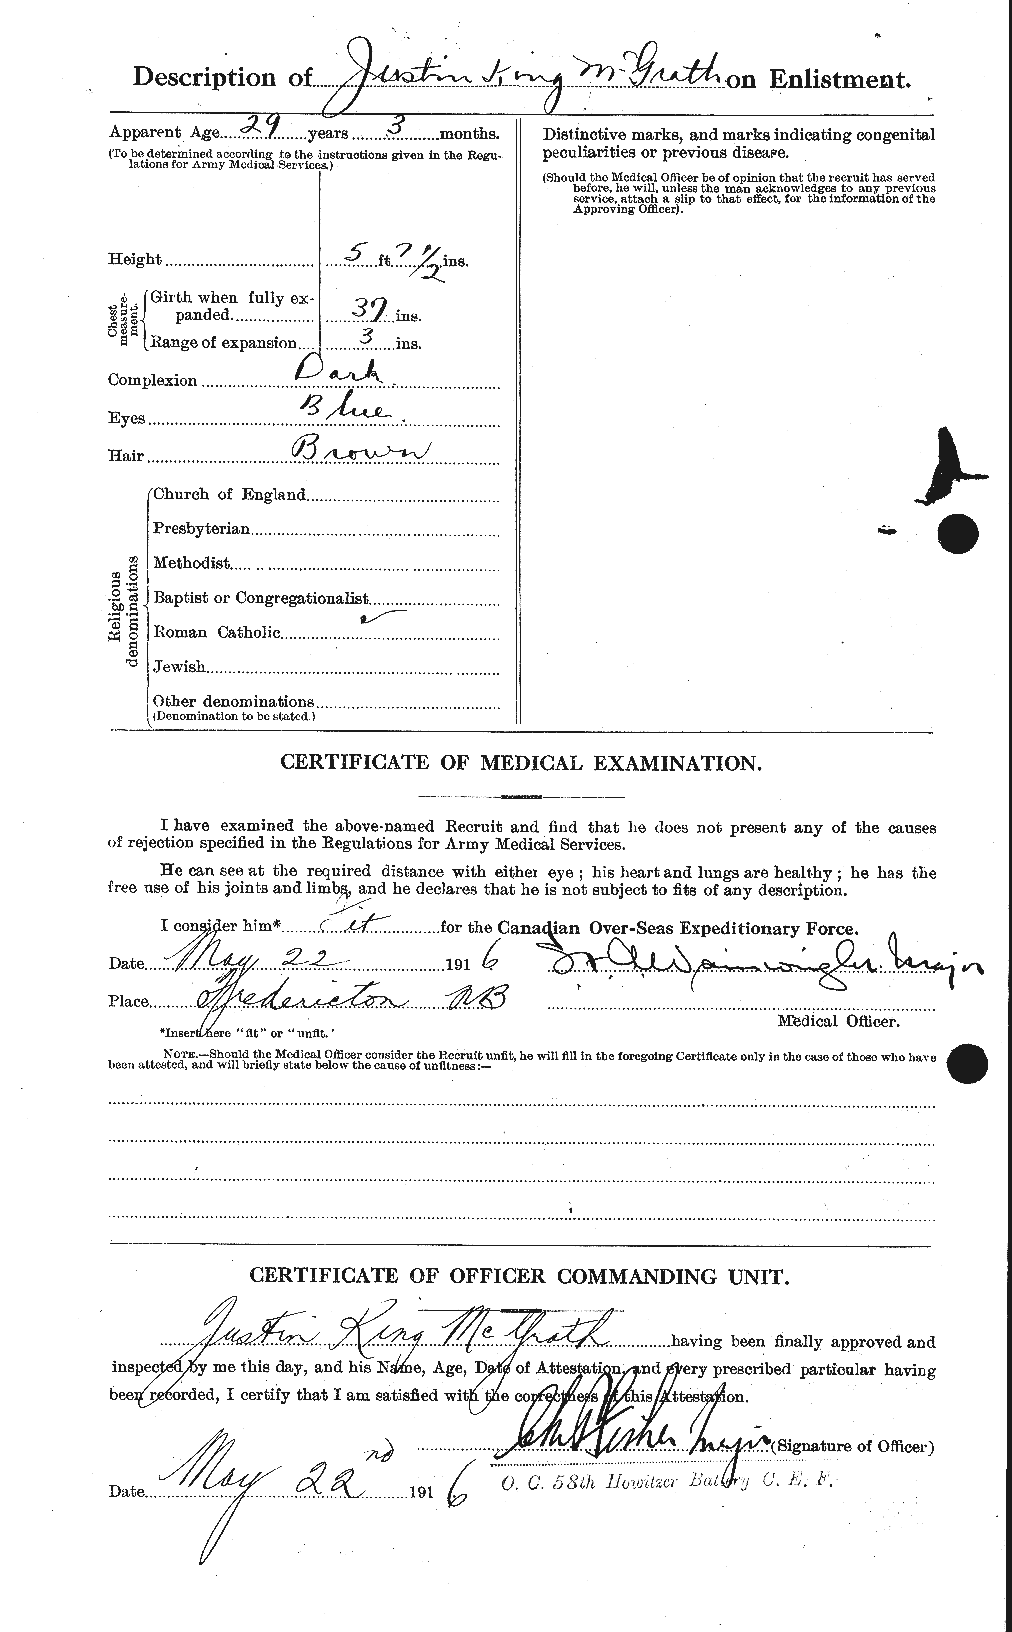 Personnel Records of the First World War - CEF 523629b